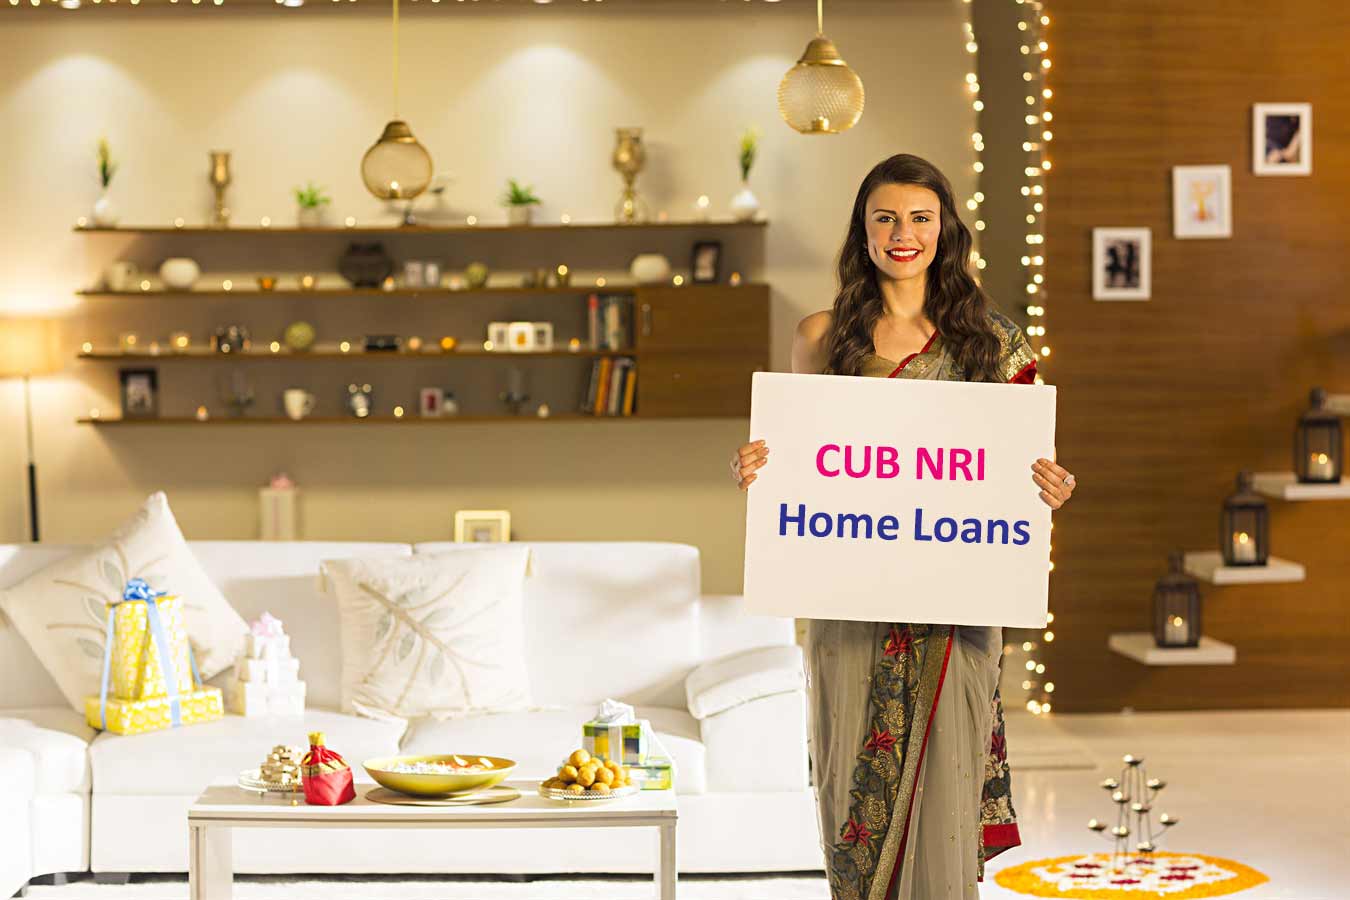 CUB Home Loan / Housing for NRIs. Quick and Easy Processing.